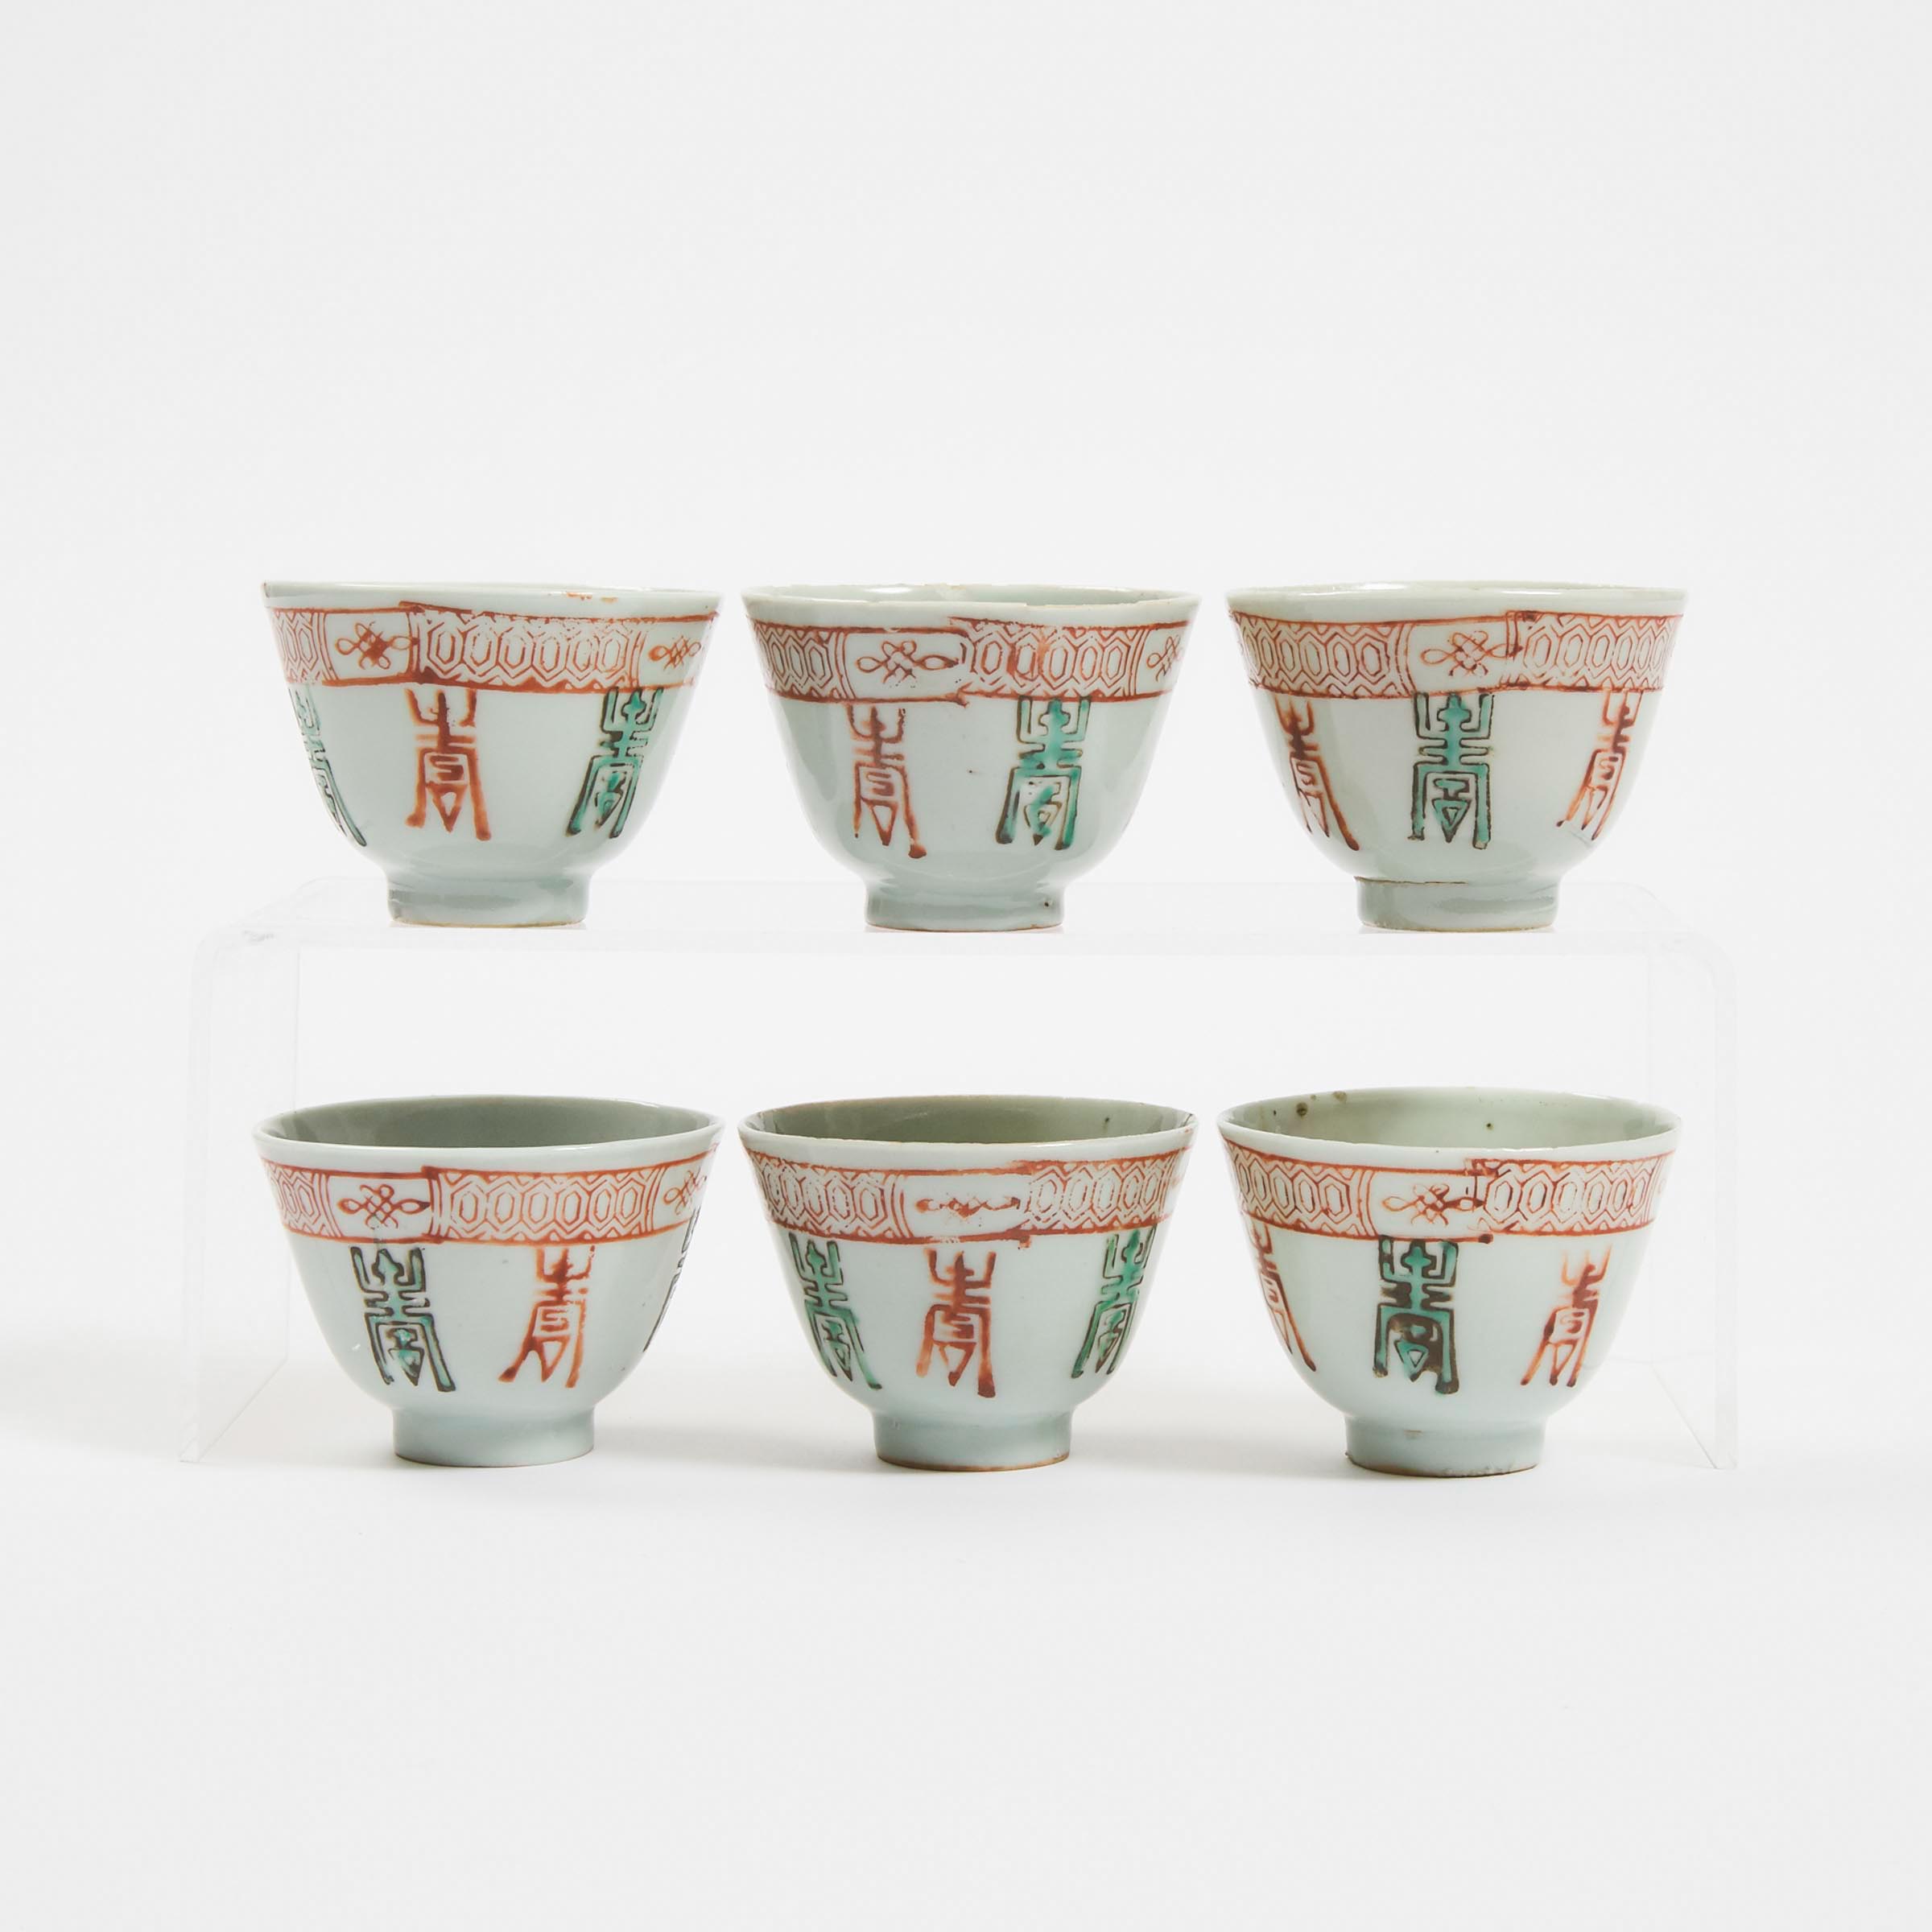 A Set of Six Iron-Red and Green Enameled 'Longevity' Porcelain Cups, 19th Century